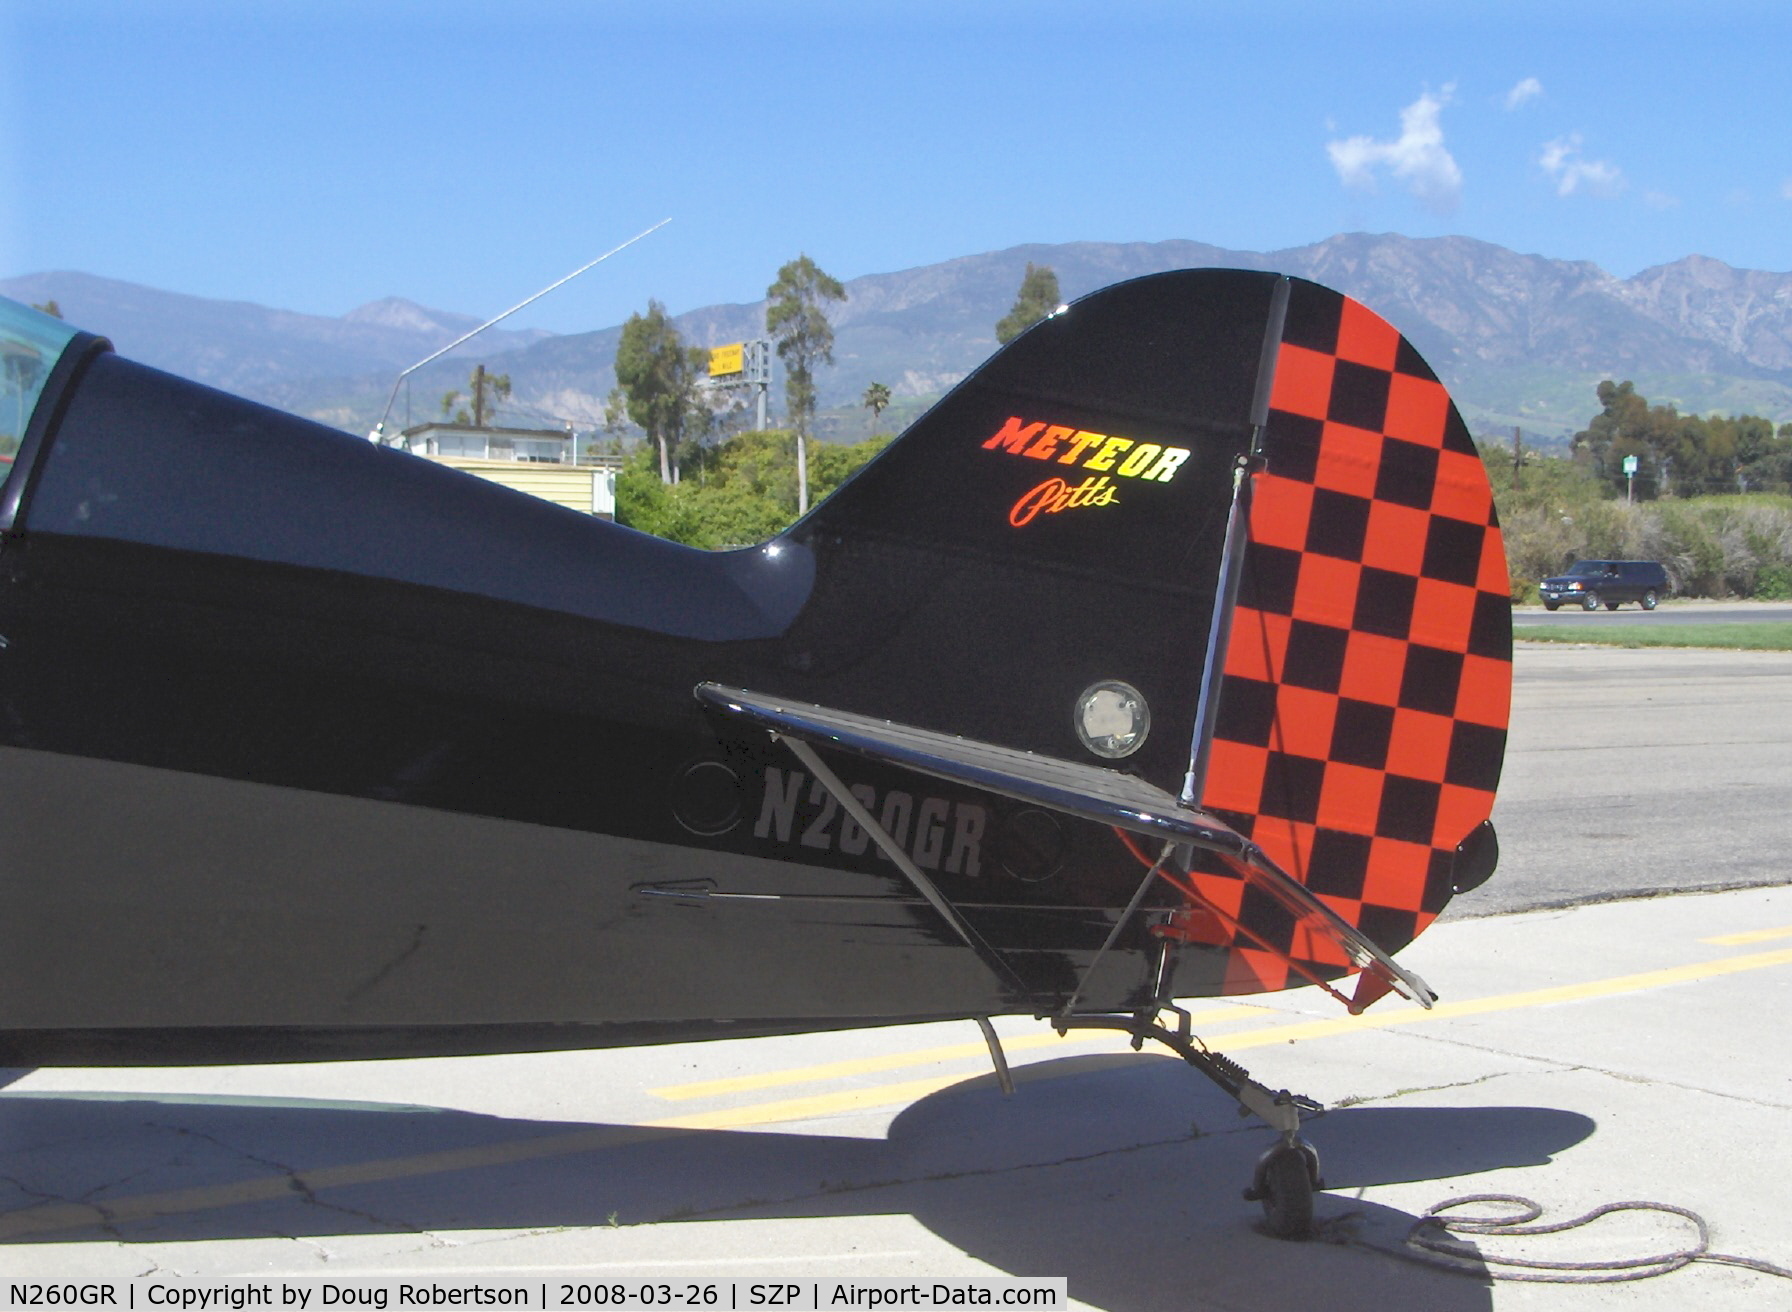 N260GR, 1984 Christen Pitts S-2B Special C/N 5059, 1984 Christen PITTS S-2B refinished with entirely new paint scheme, Lycoming AEIO-540 260 Hp, tail logo. Note elevator linkage clear inspection port for pre-flight